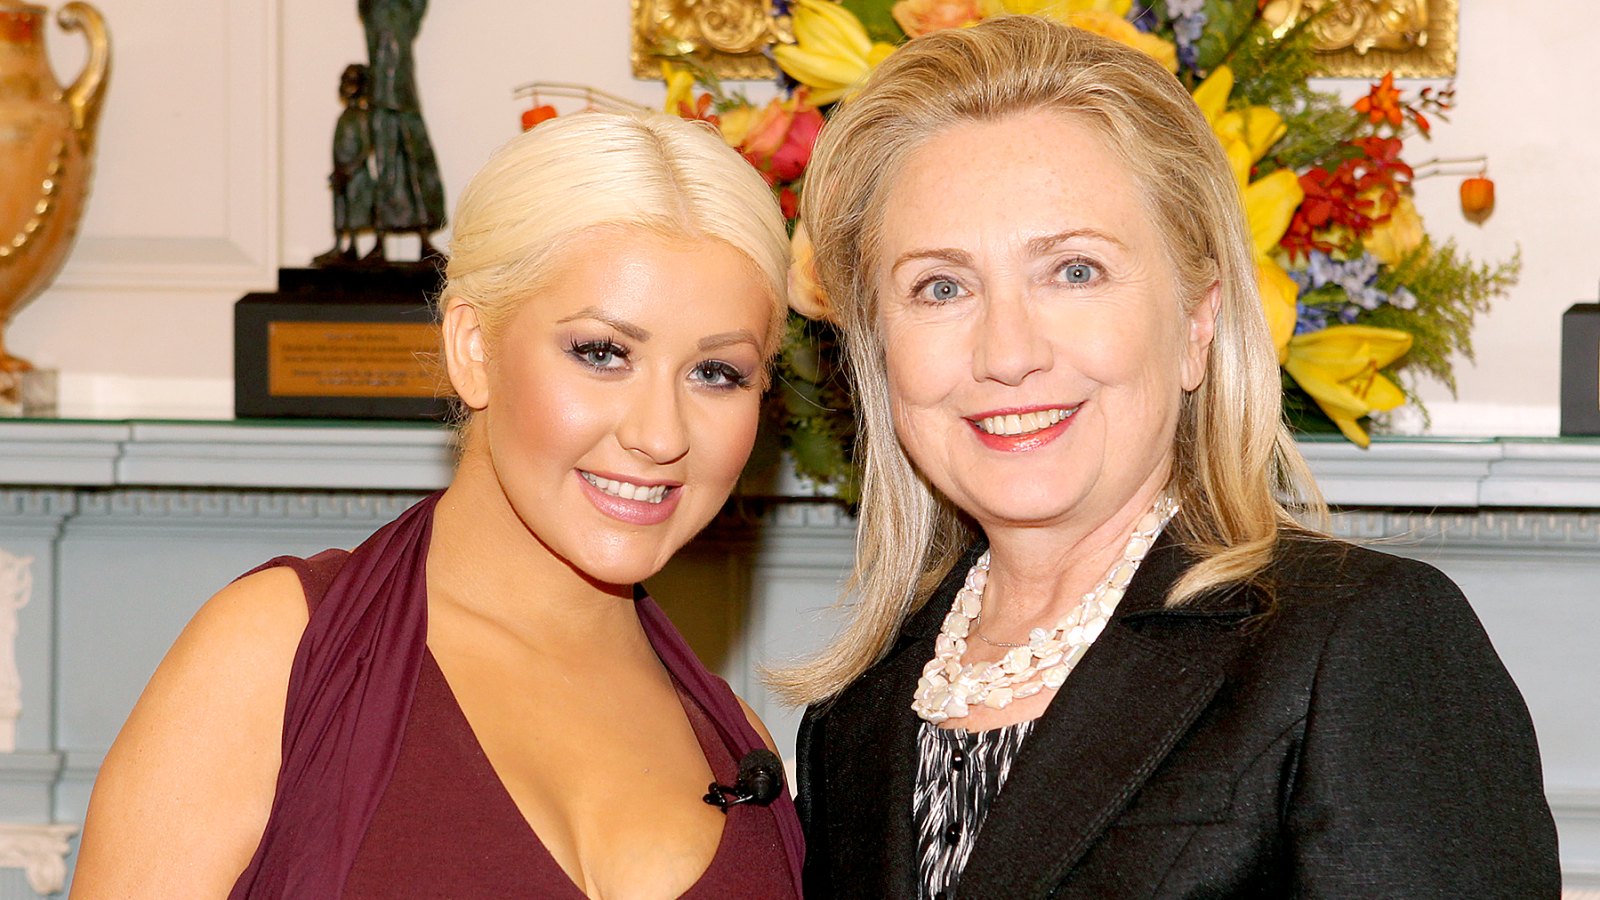 Christina Aguilera and Hillary Clinton pose for a photo at the George McGovern Leadership Award Ceremony where they were honored for their world hunger relief efforts by the World Food Progam at the U.S. State Department in Washington on Wednesday, Oct. 3, 2012.